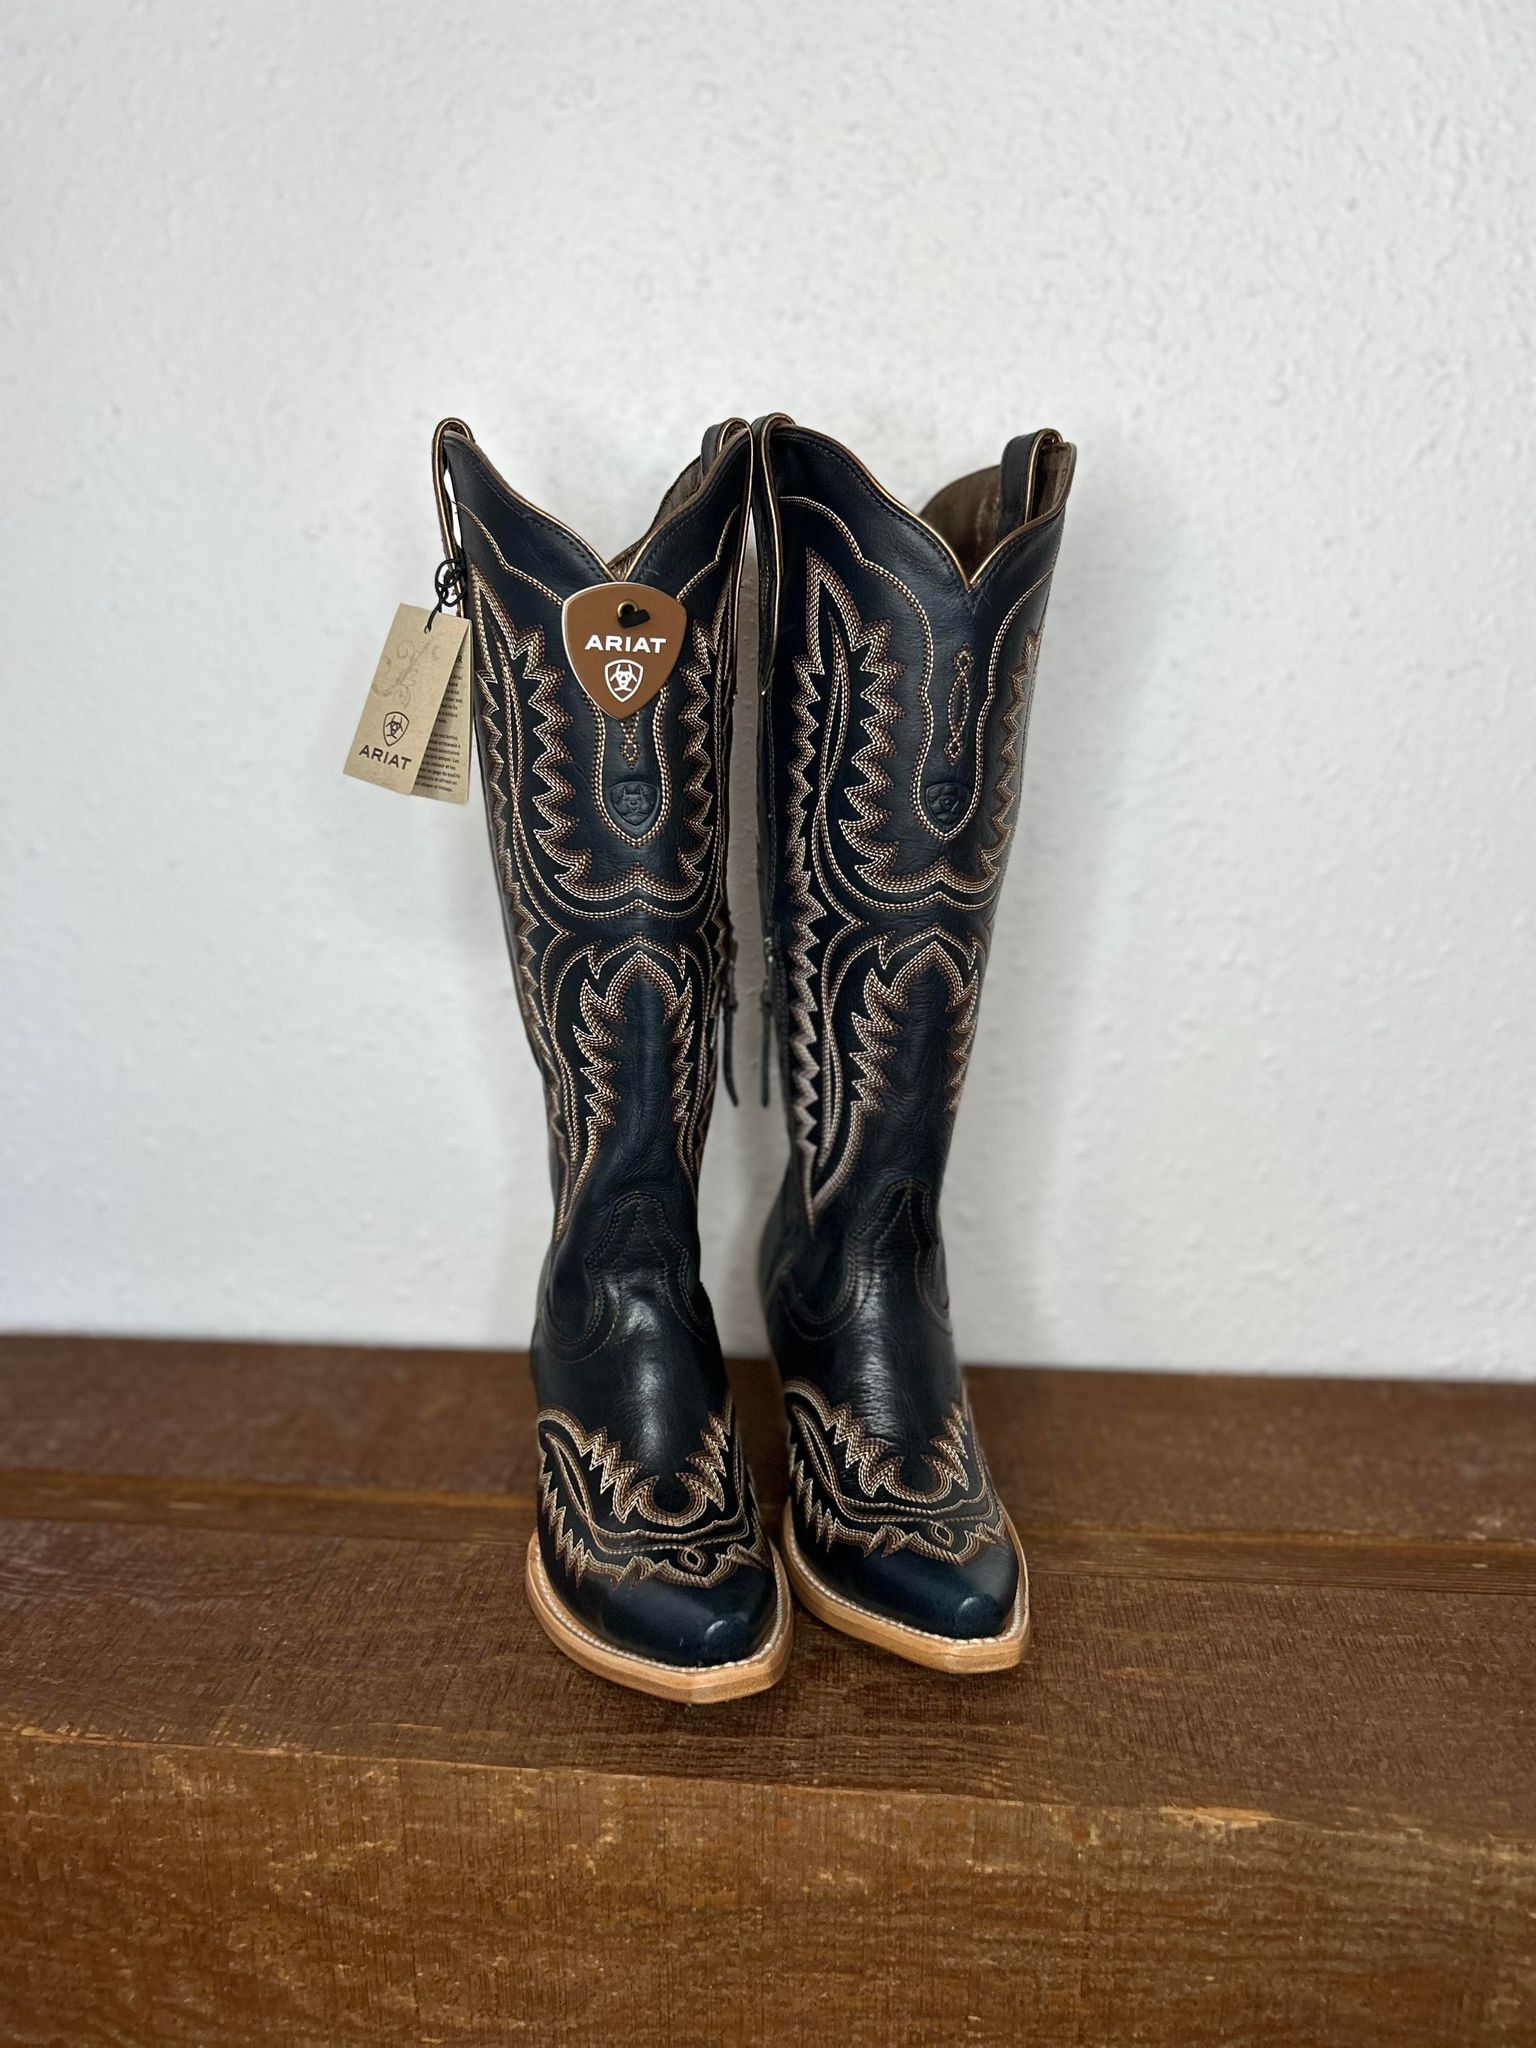 Women's Ariat Deepest Navy Casanova Boots-Women's Boots-Ariat-Lucky J Boots & More, Women's, Men's, & Kids Western Store Located in Carthage, MO